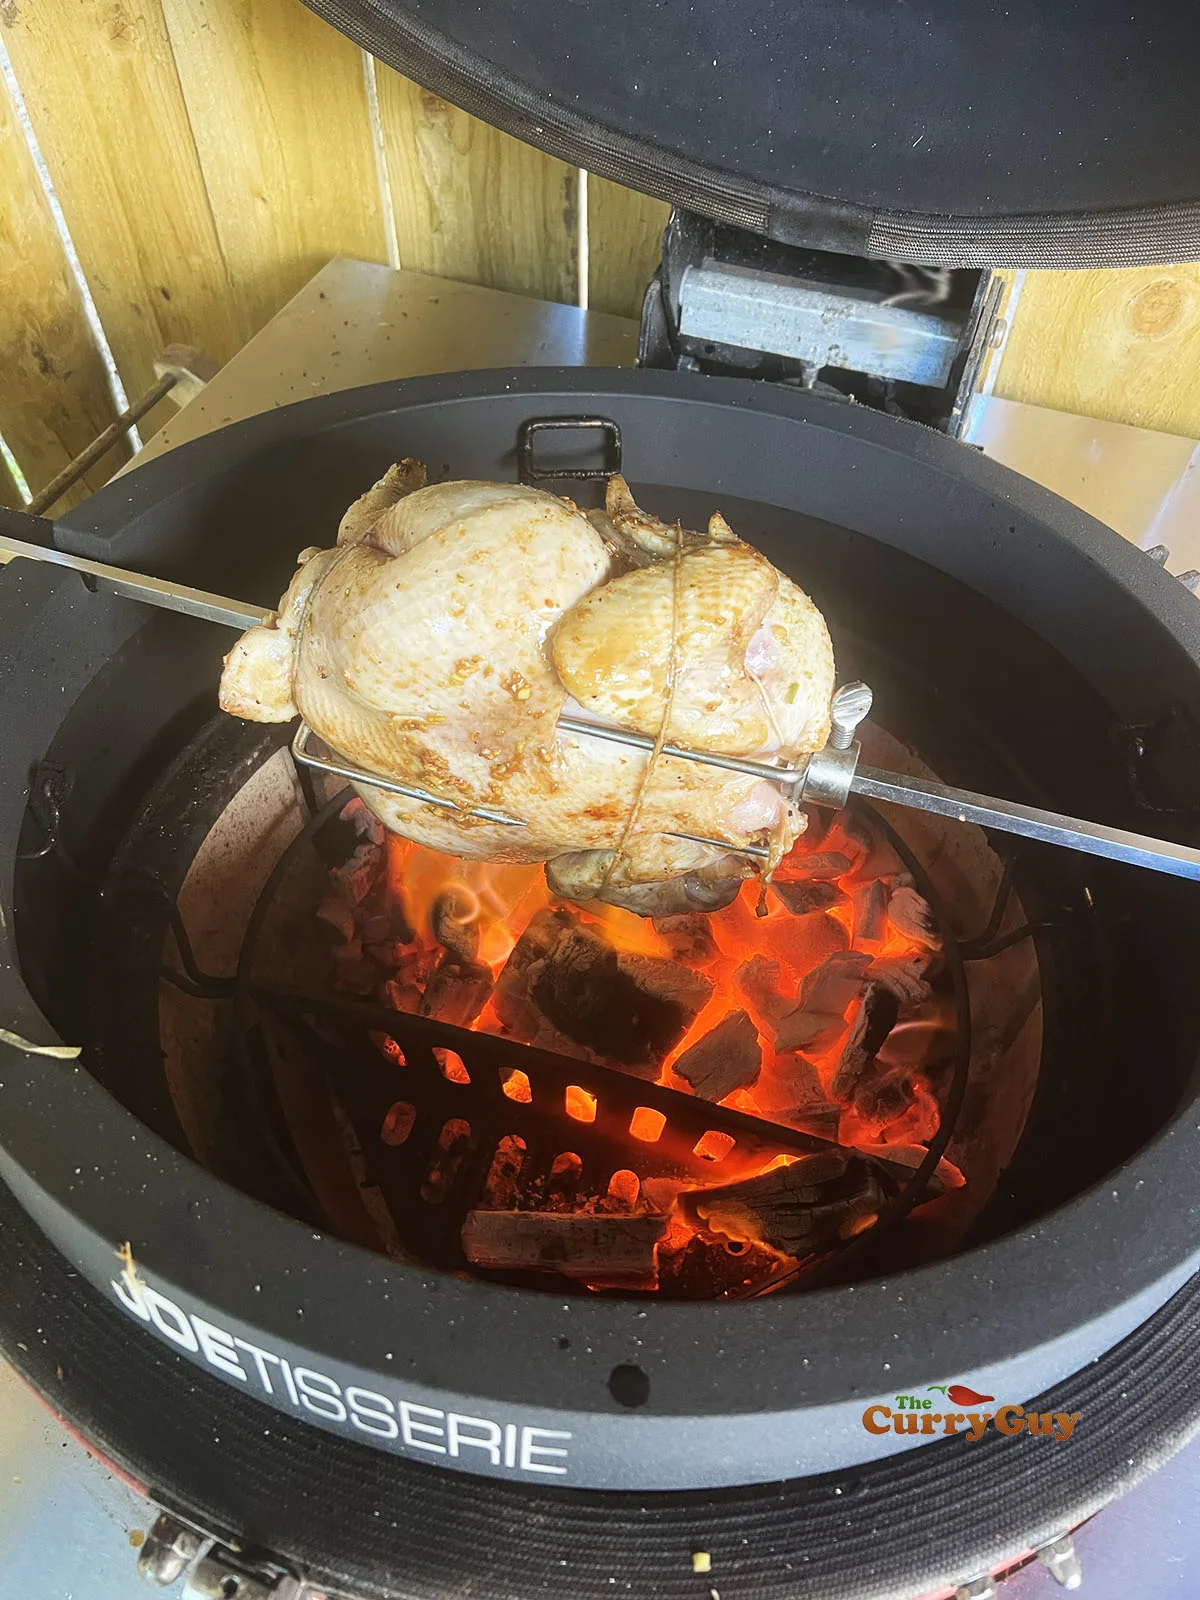 Placing the chicken over the barbecue on the rotisserie.